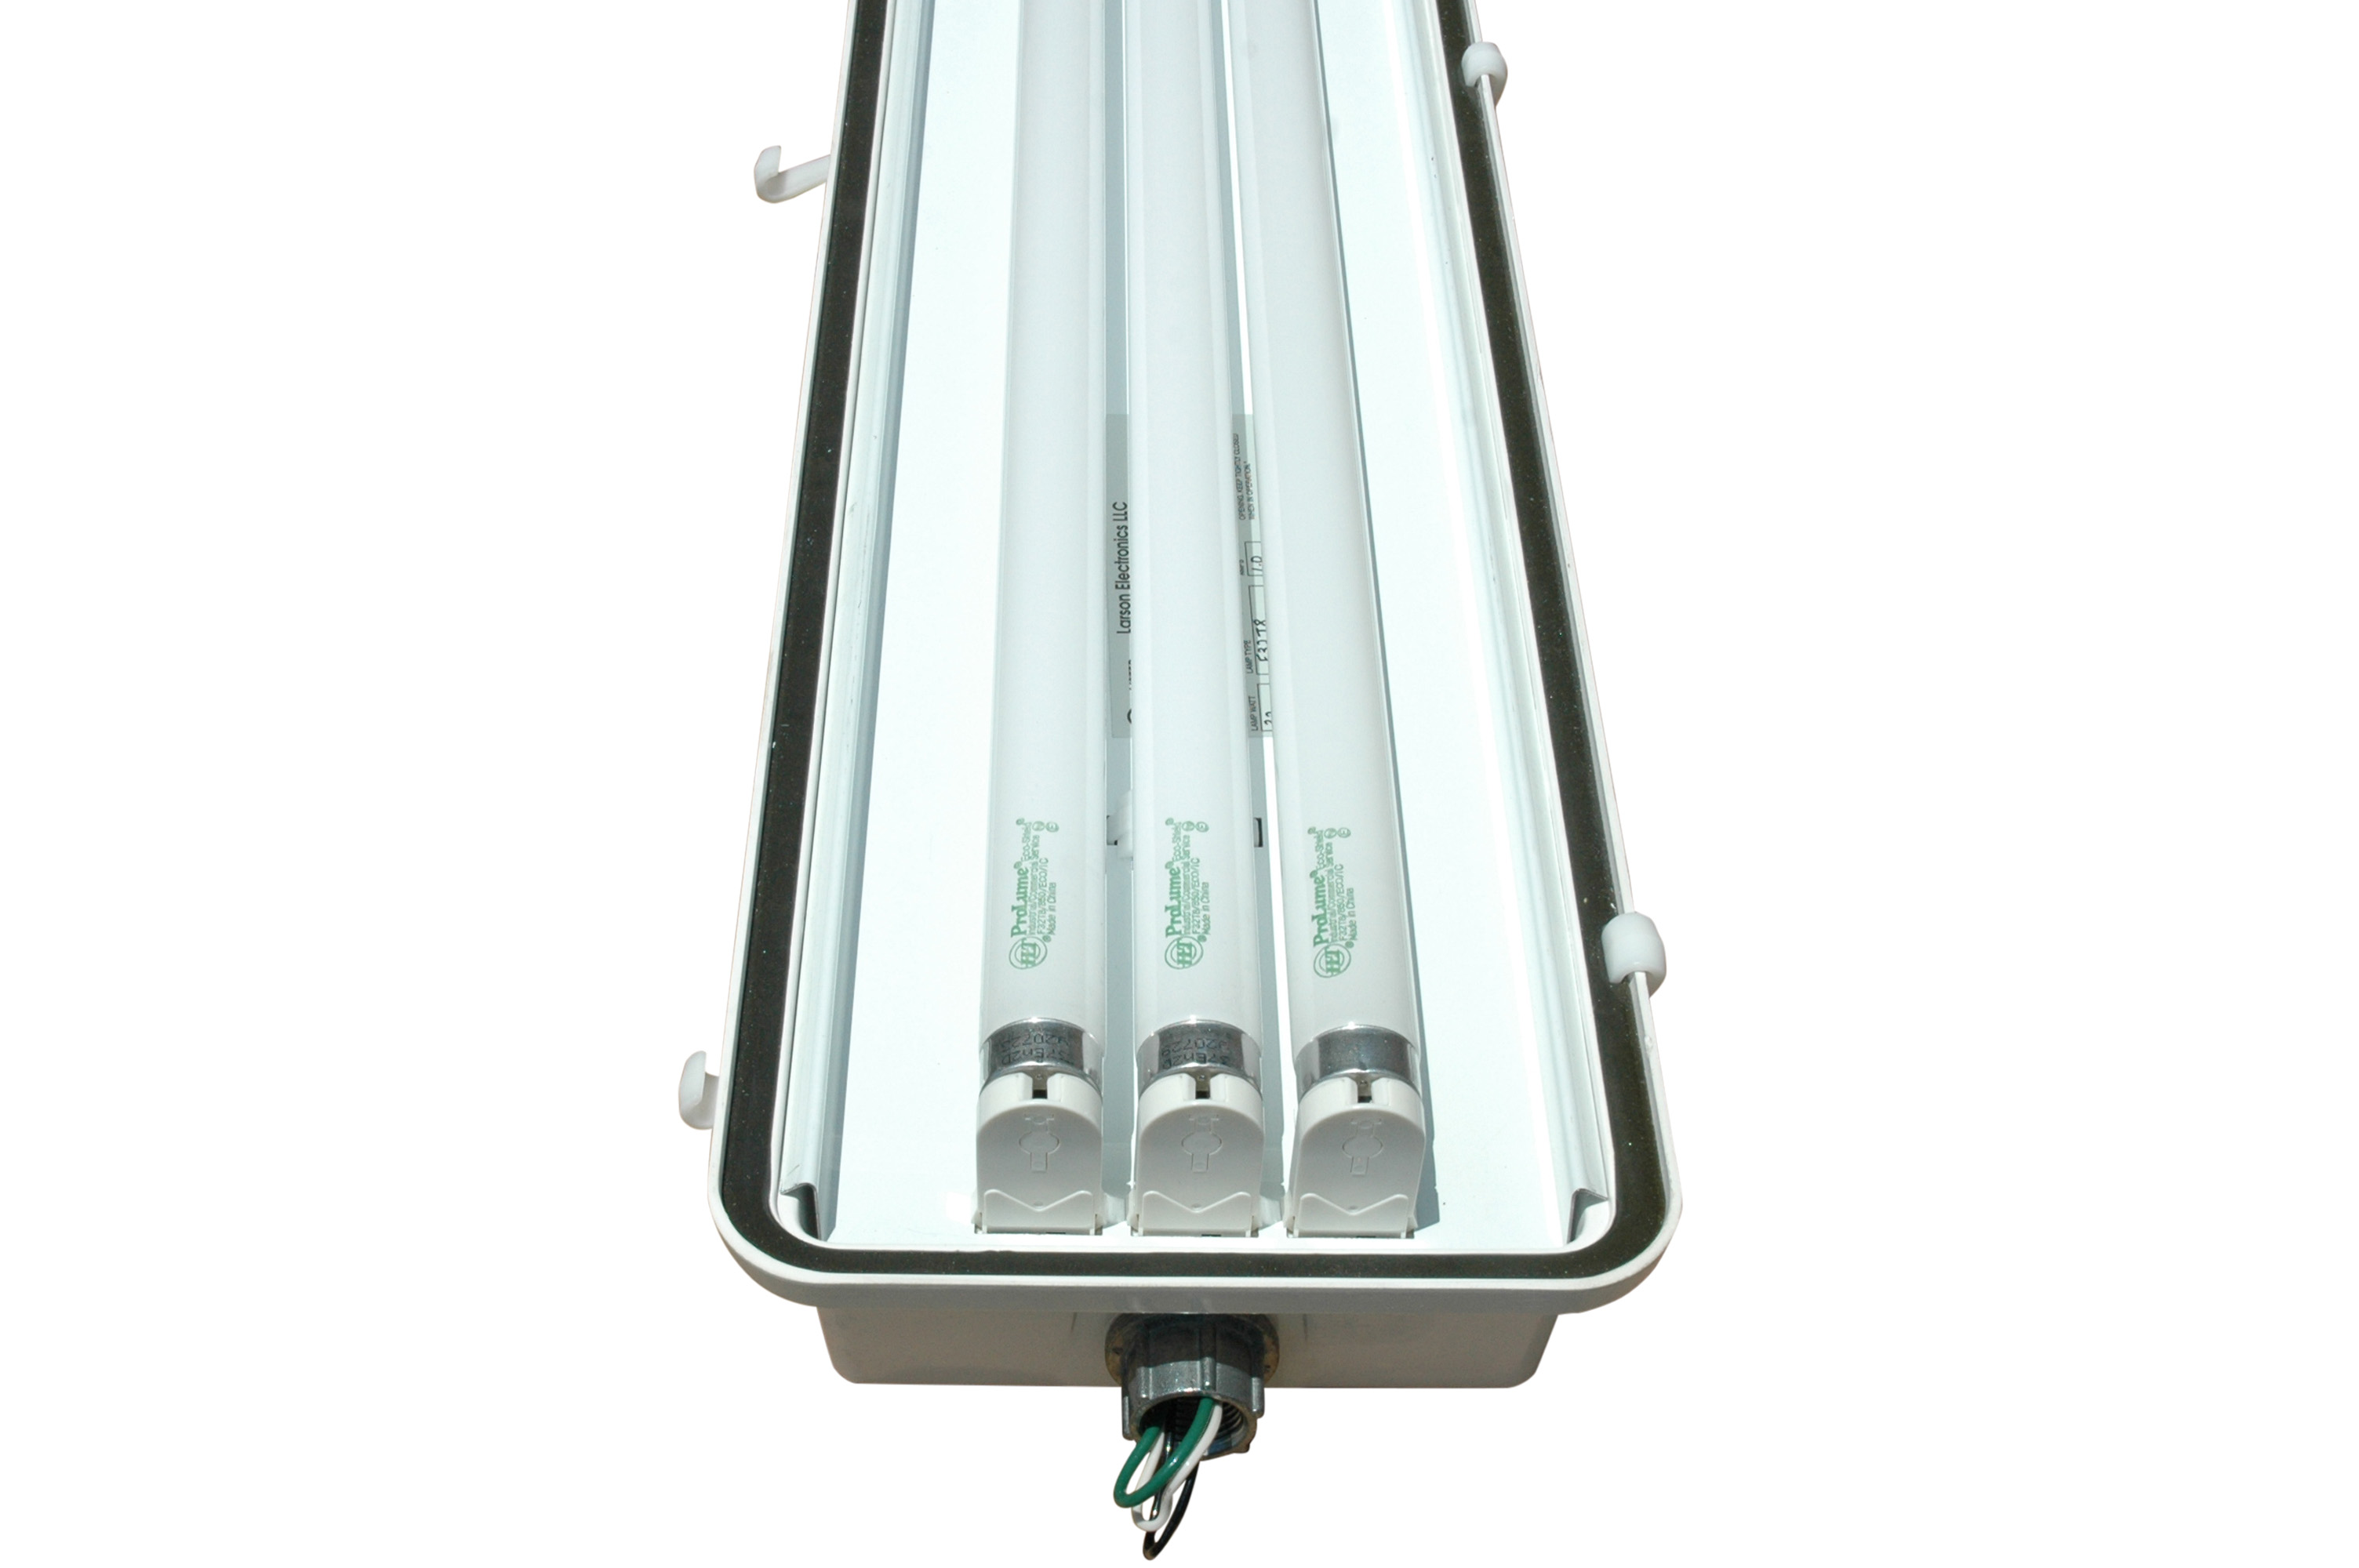 Three Lamp Fluorescent Light Fixture Equipped with Optional T5HO, T8, or T12HO Lamps